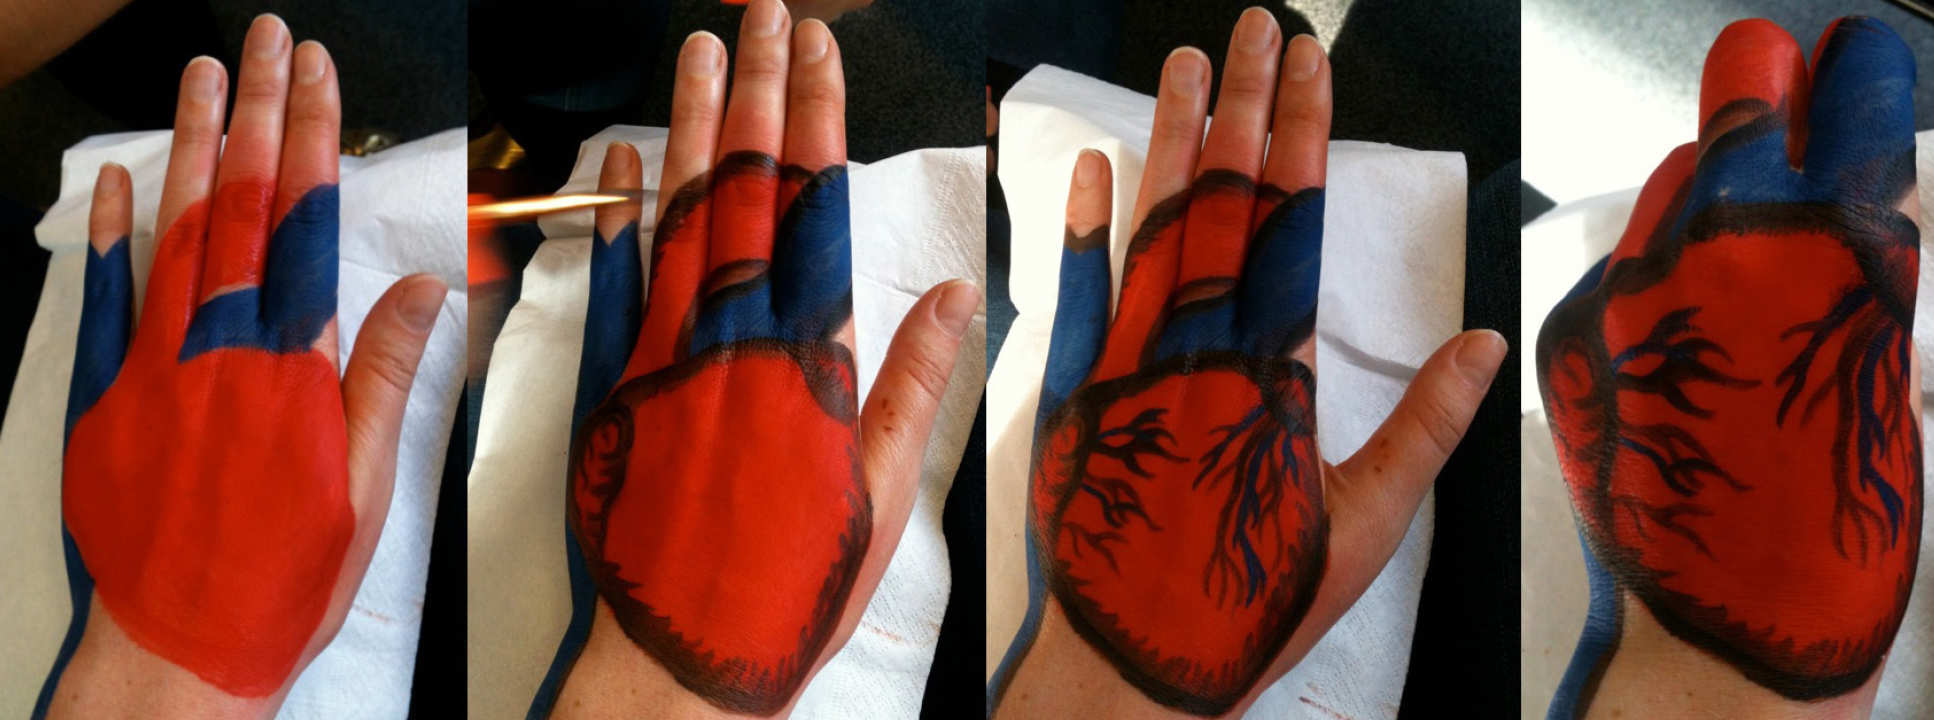 Painted hearts on hands